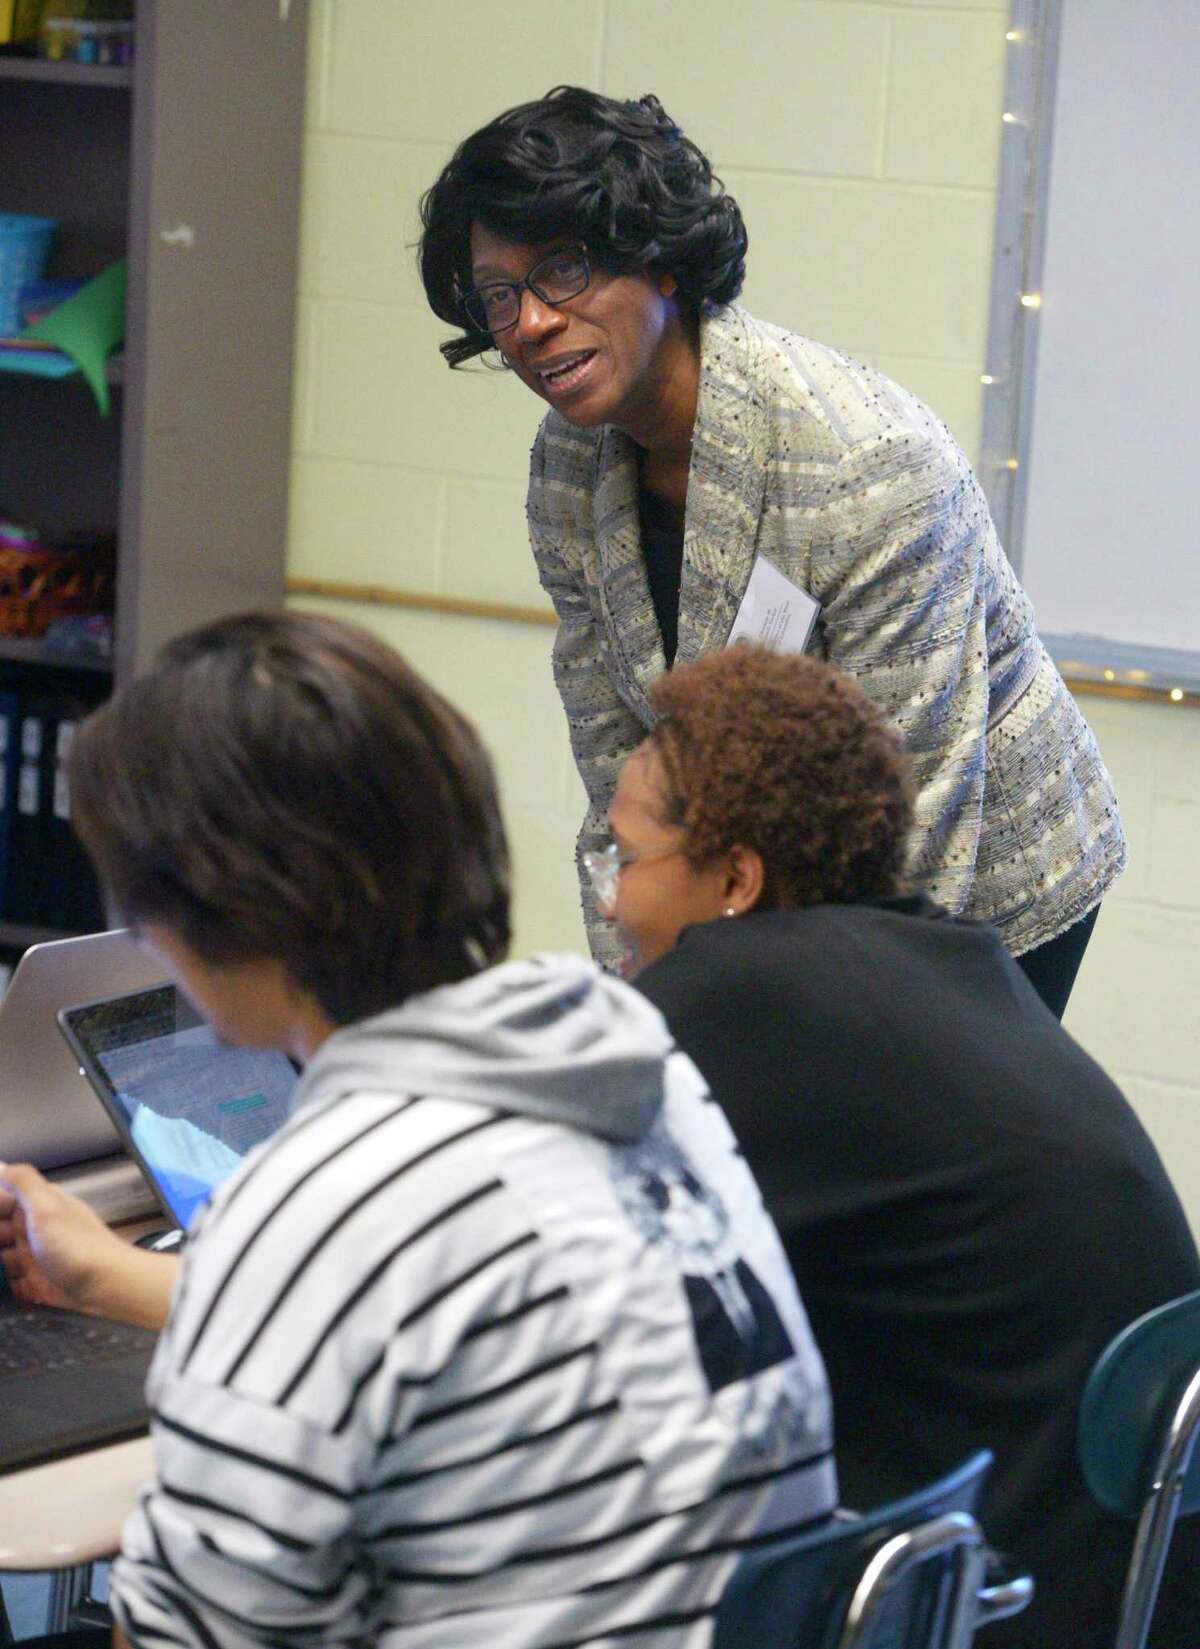 Connecticut Education Commissioner Charlene Russell-Tucker speaks to students in Workplace Learning 3 during a visit to Danbury High School on Tuesday morning. March 22, 2022, Danbury, Conn.